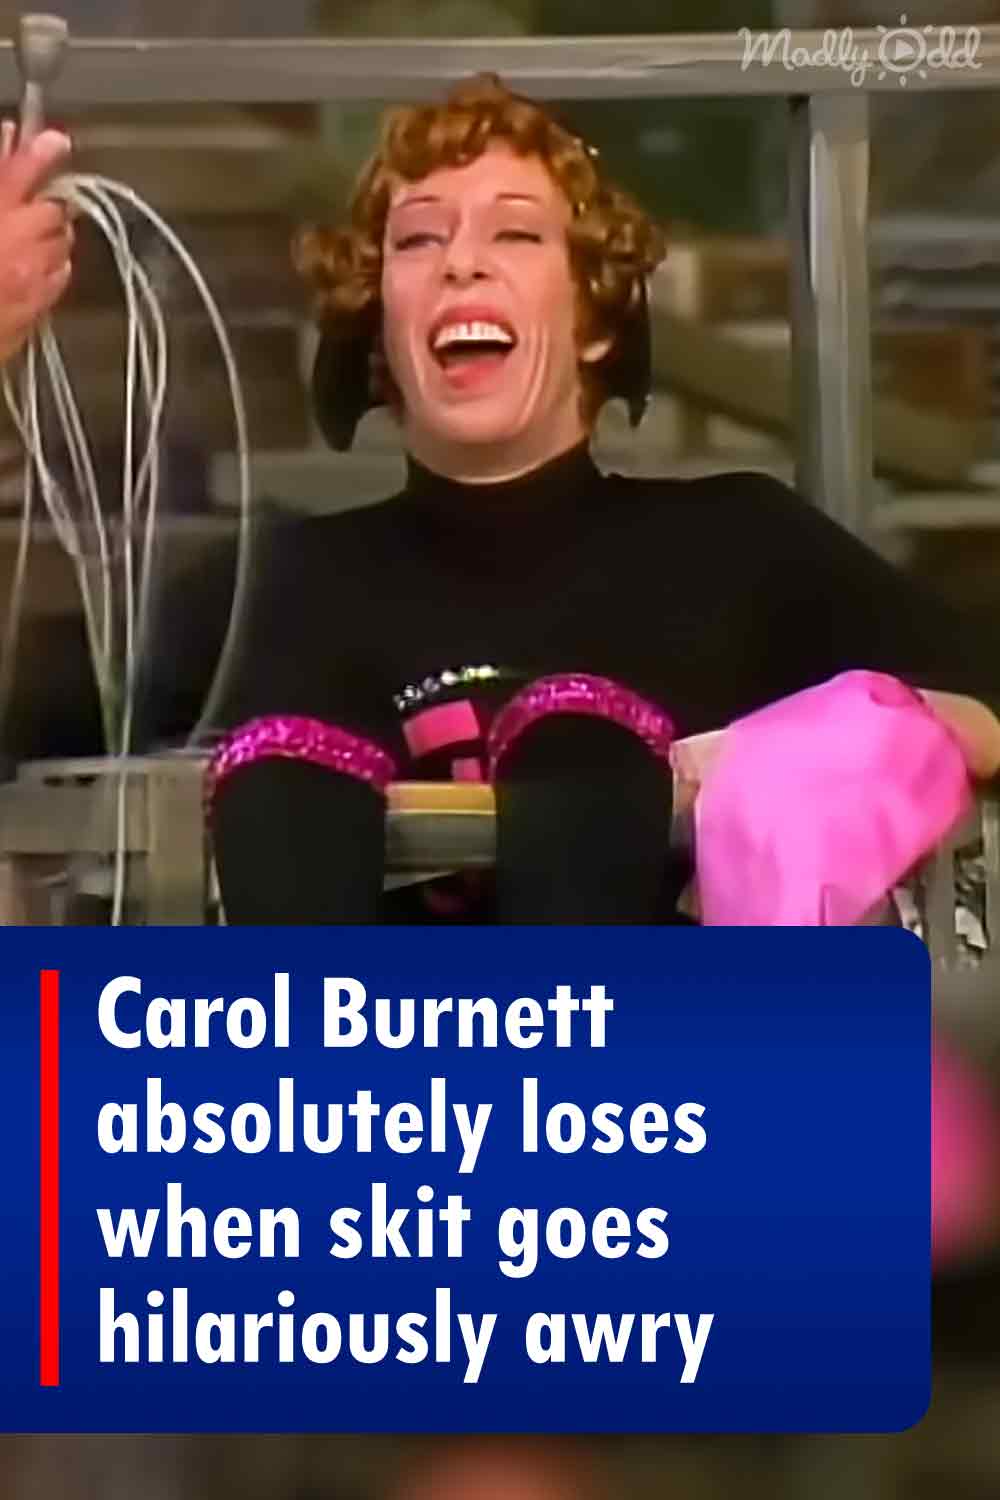 Carol Burnett absolutely loses when skit goes hilariously awry